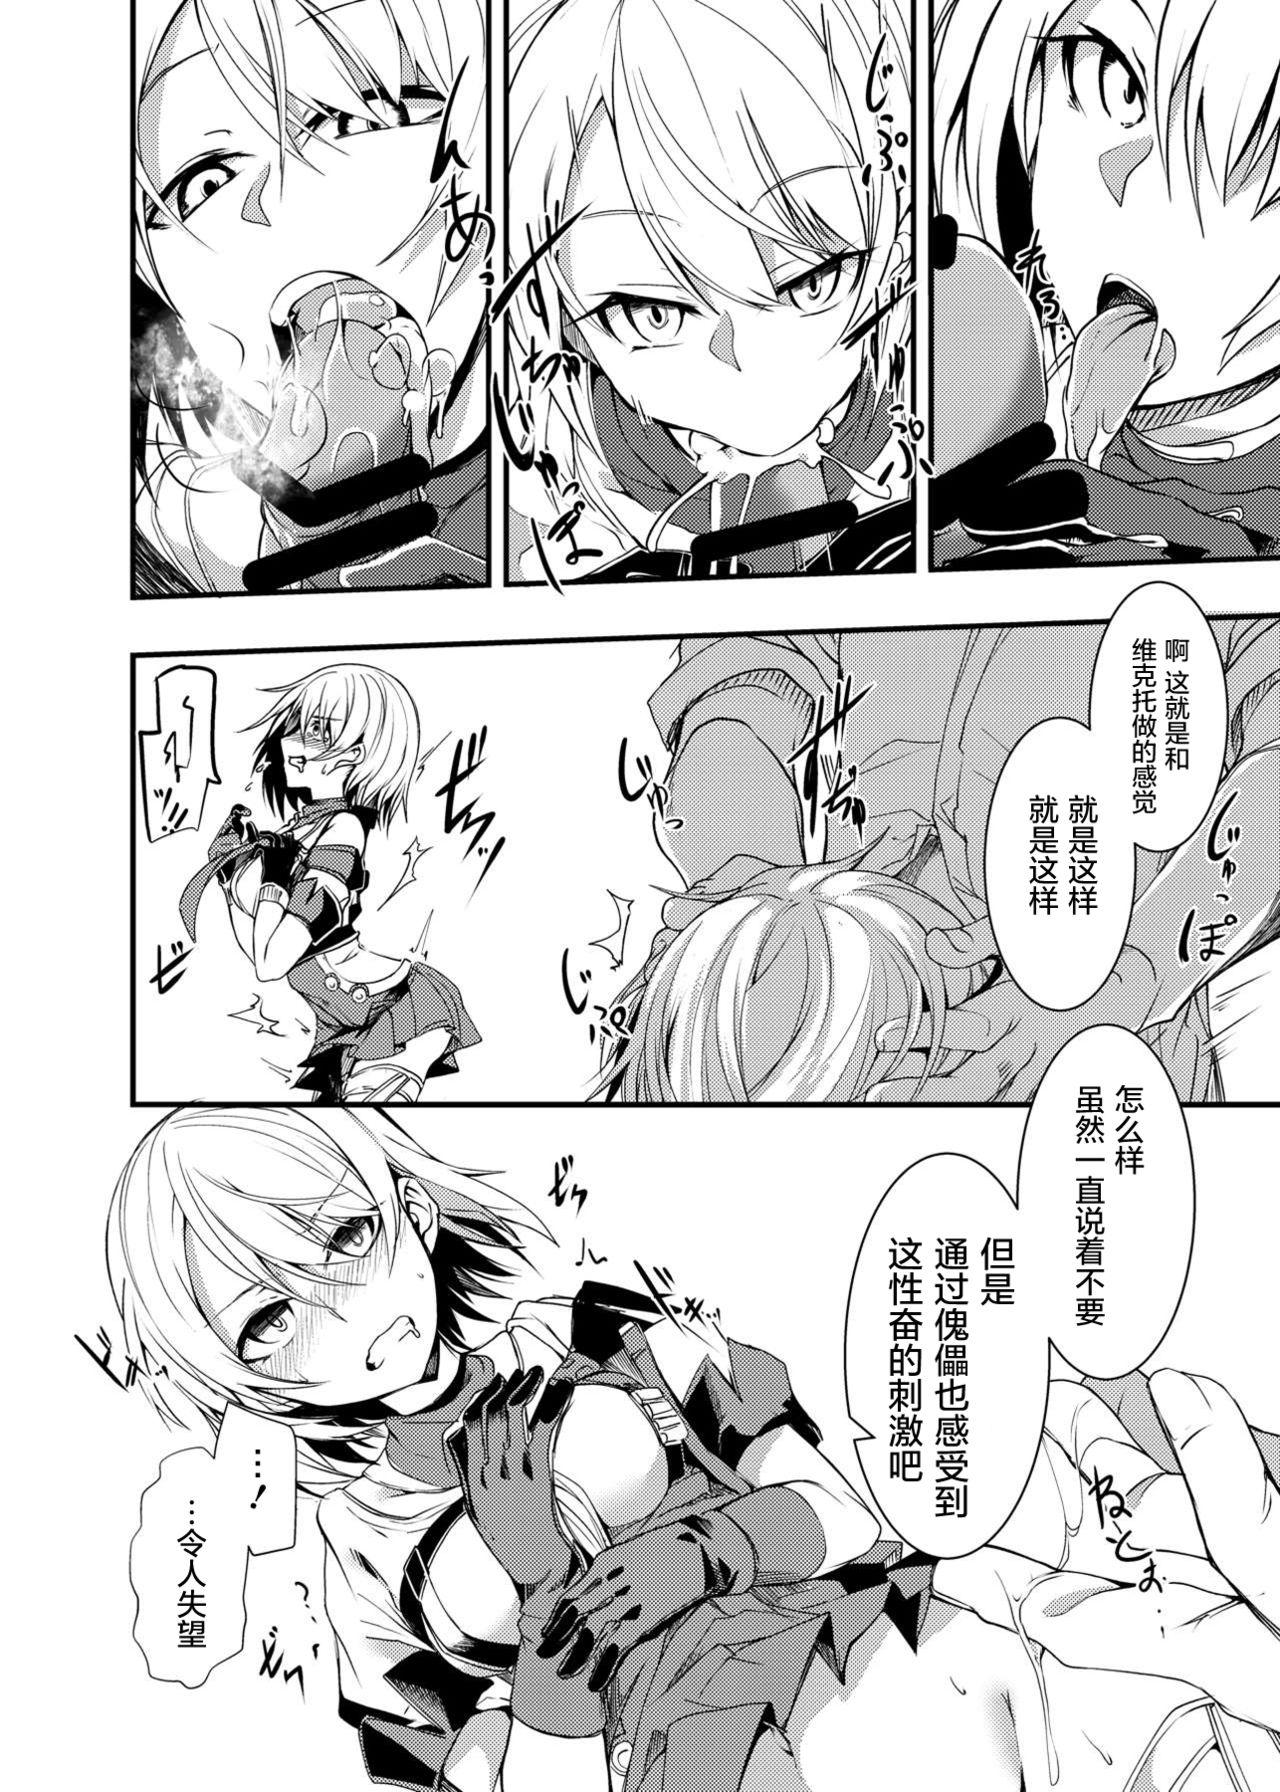 Bed ドルフロ ベクターちゃん本（屏幕髒了漢化組） - Girls frontline Interracial Hardcore - Page 4